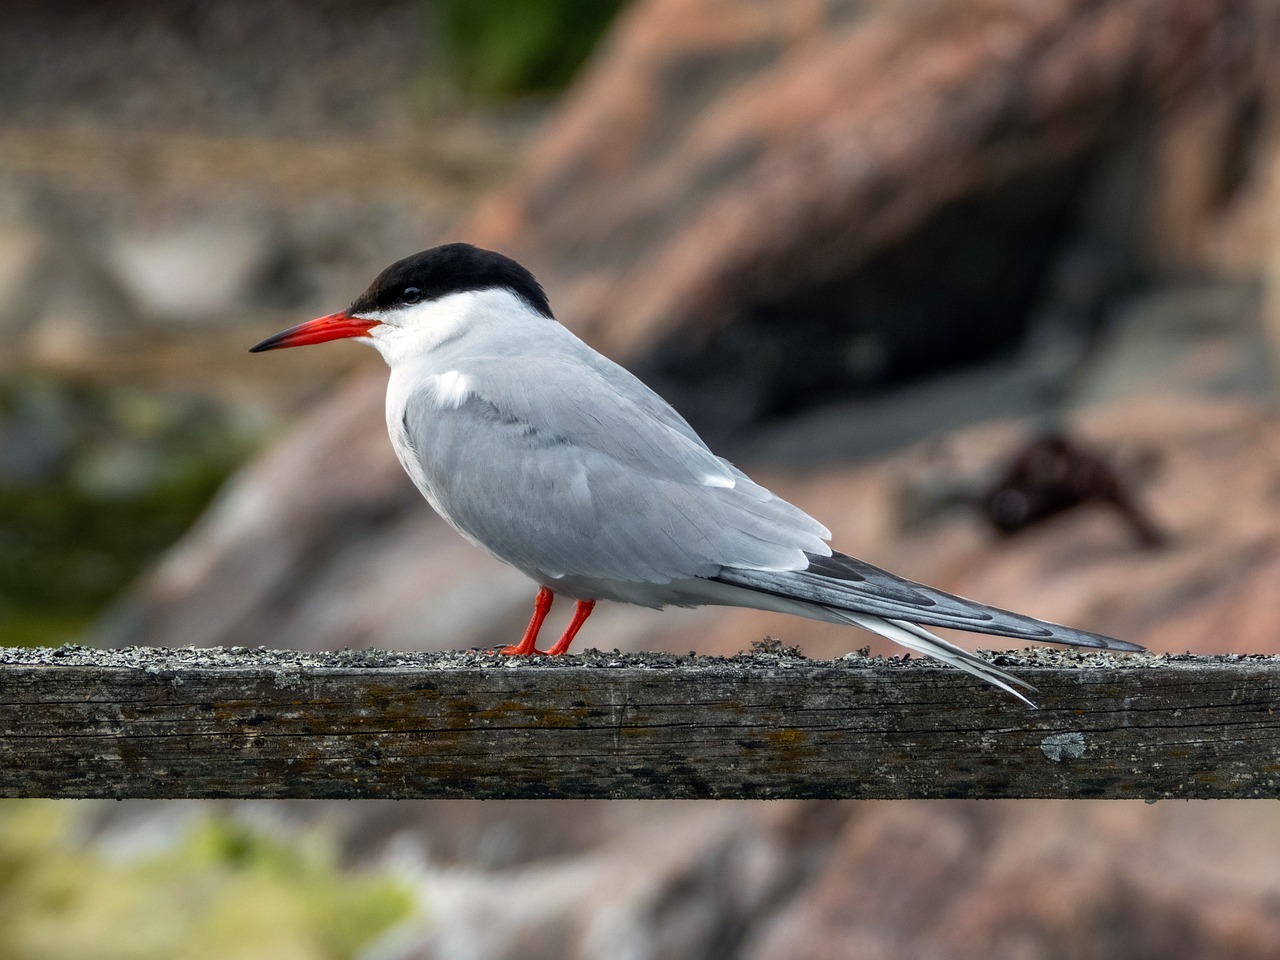 a bird sitting on top of a wooden fence, arabesque, red eyed, sleek white, on the coast, smooth shank